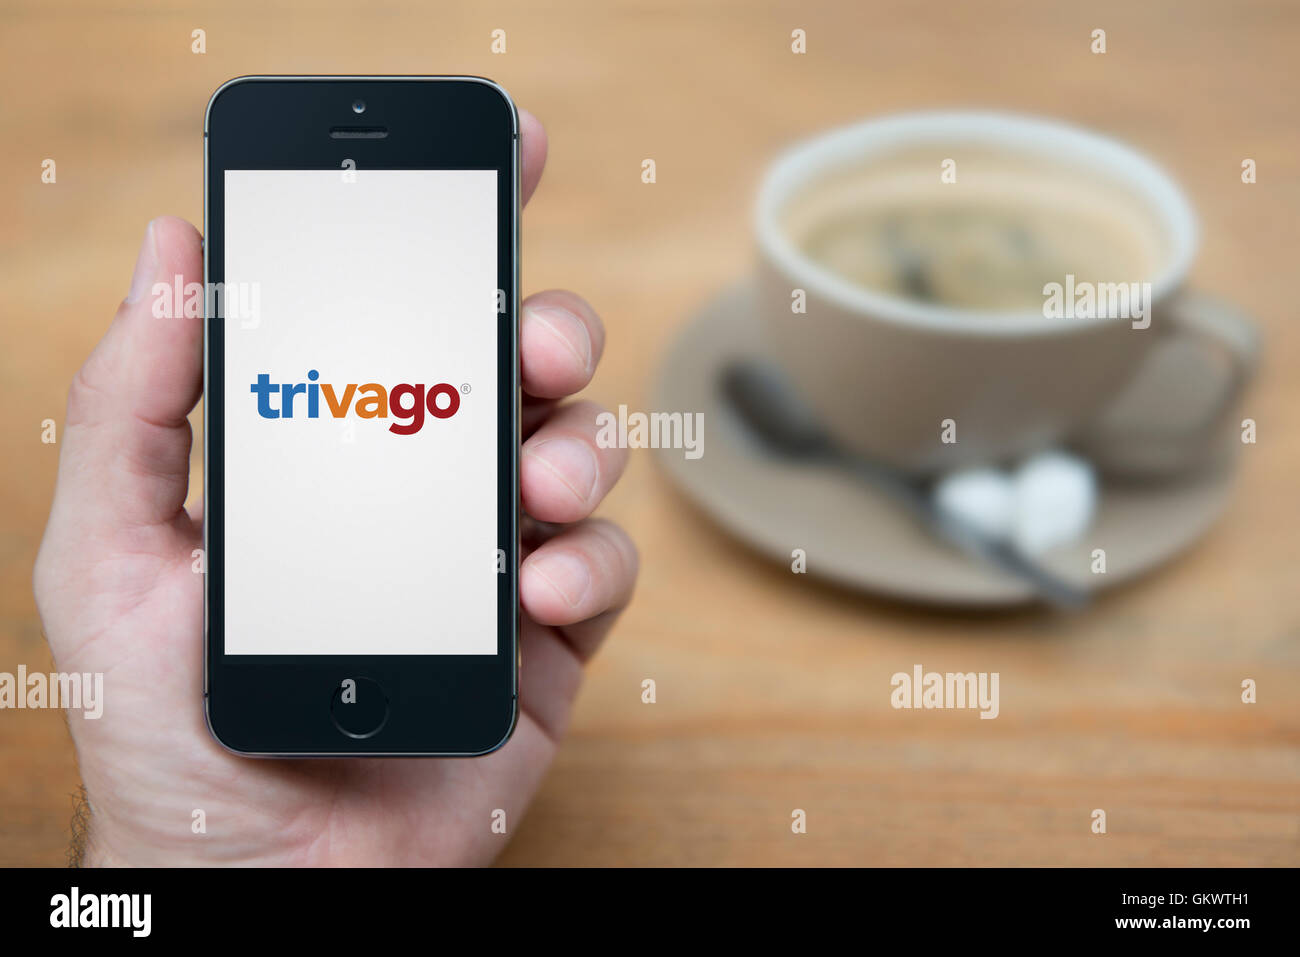 A man looks at his iPhone which displays the Trivago logo, while sat with a cup of coffee (Editorial use only). Stock Photo